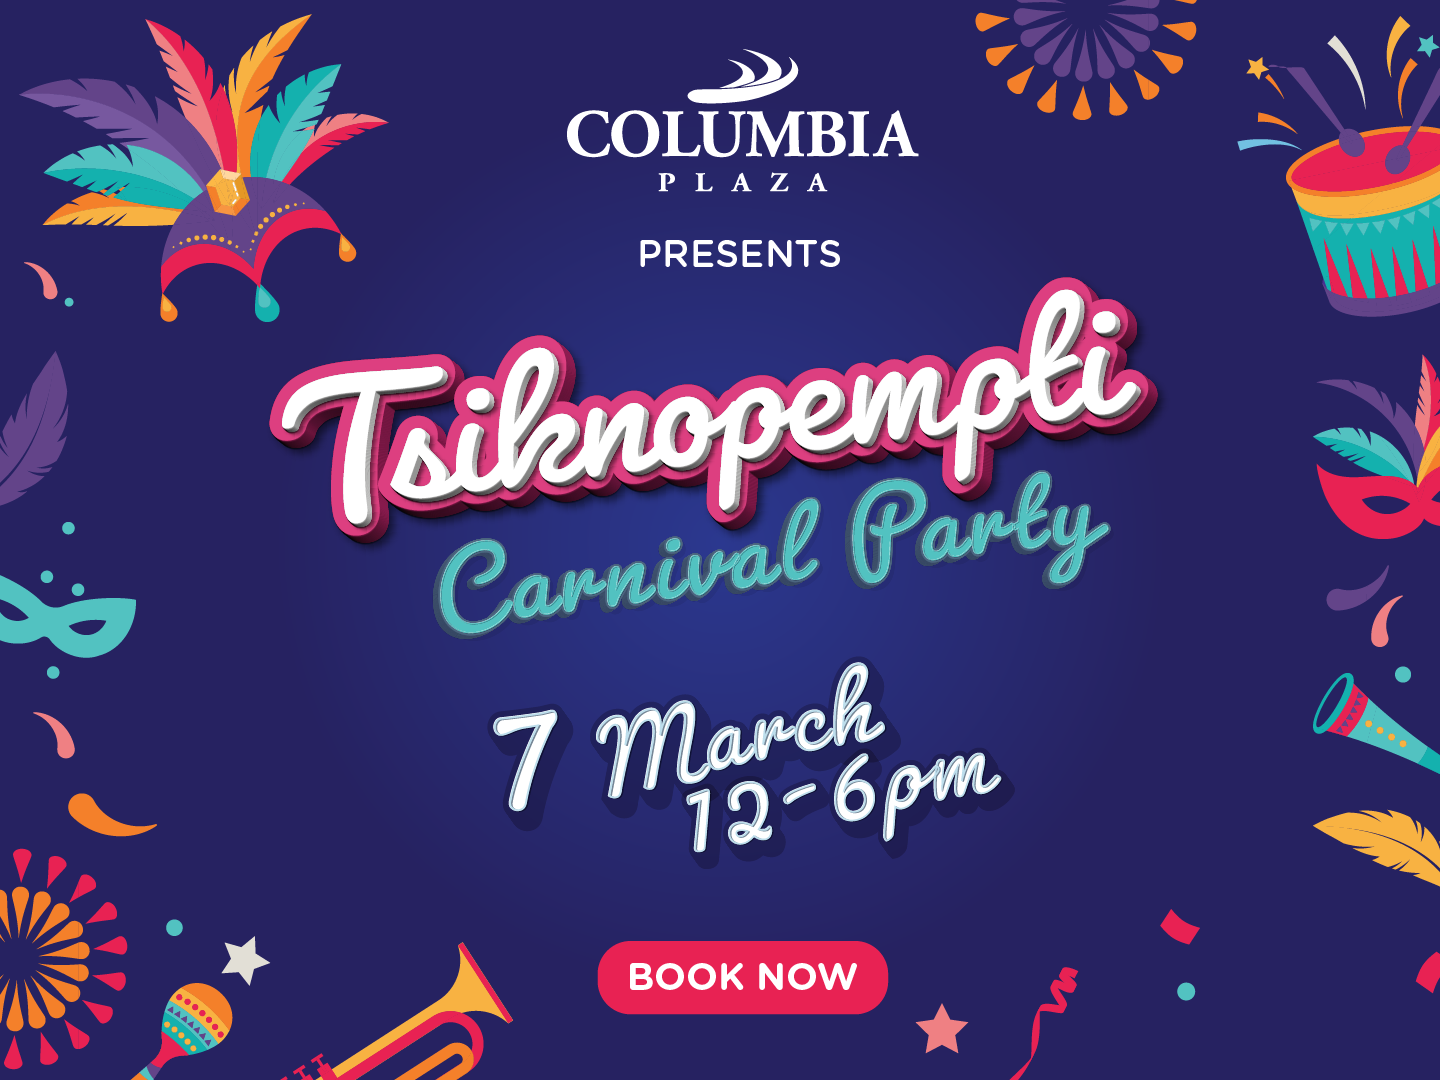 Columbia Plaza's Tsiknopempti Carnival Party